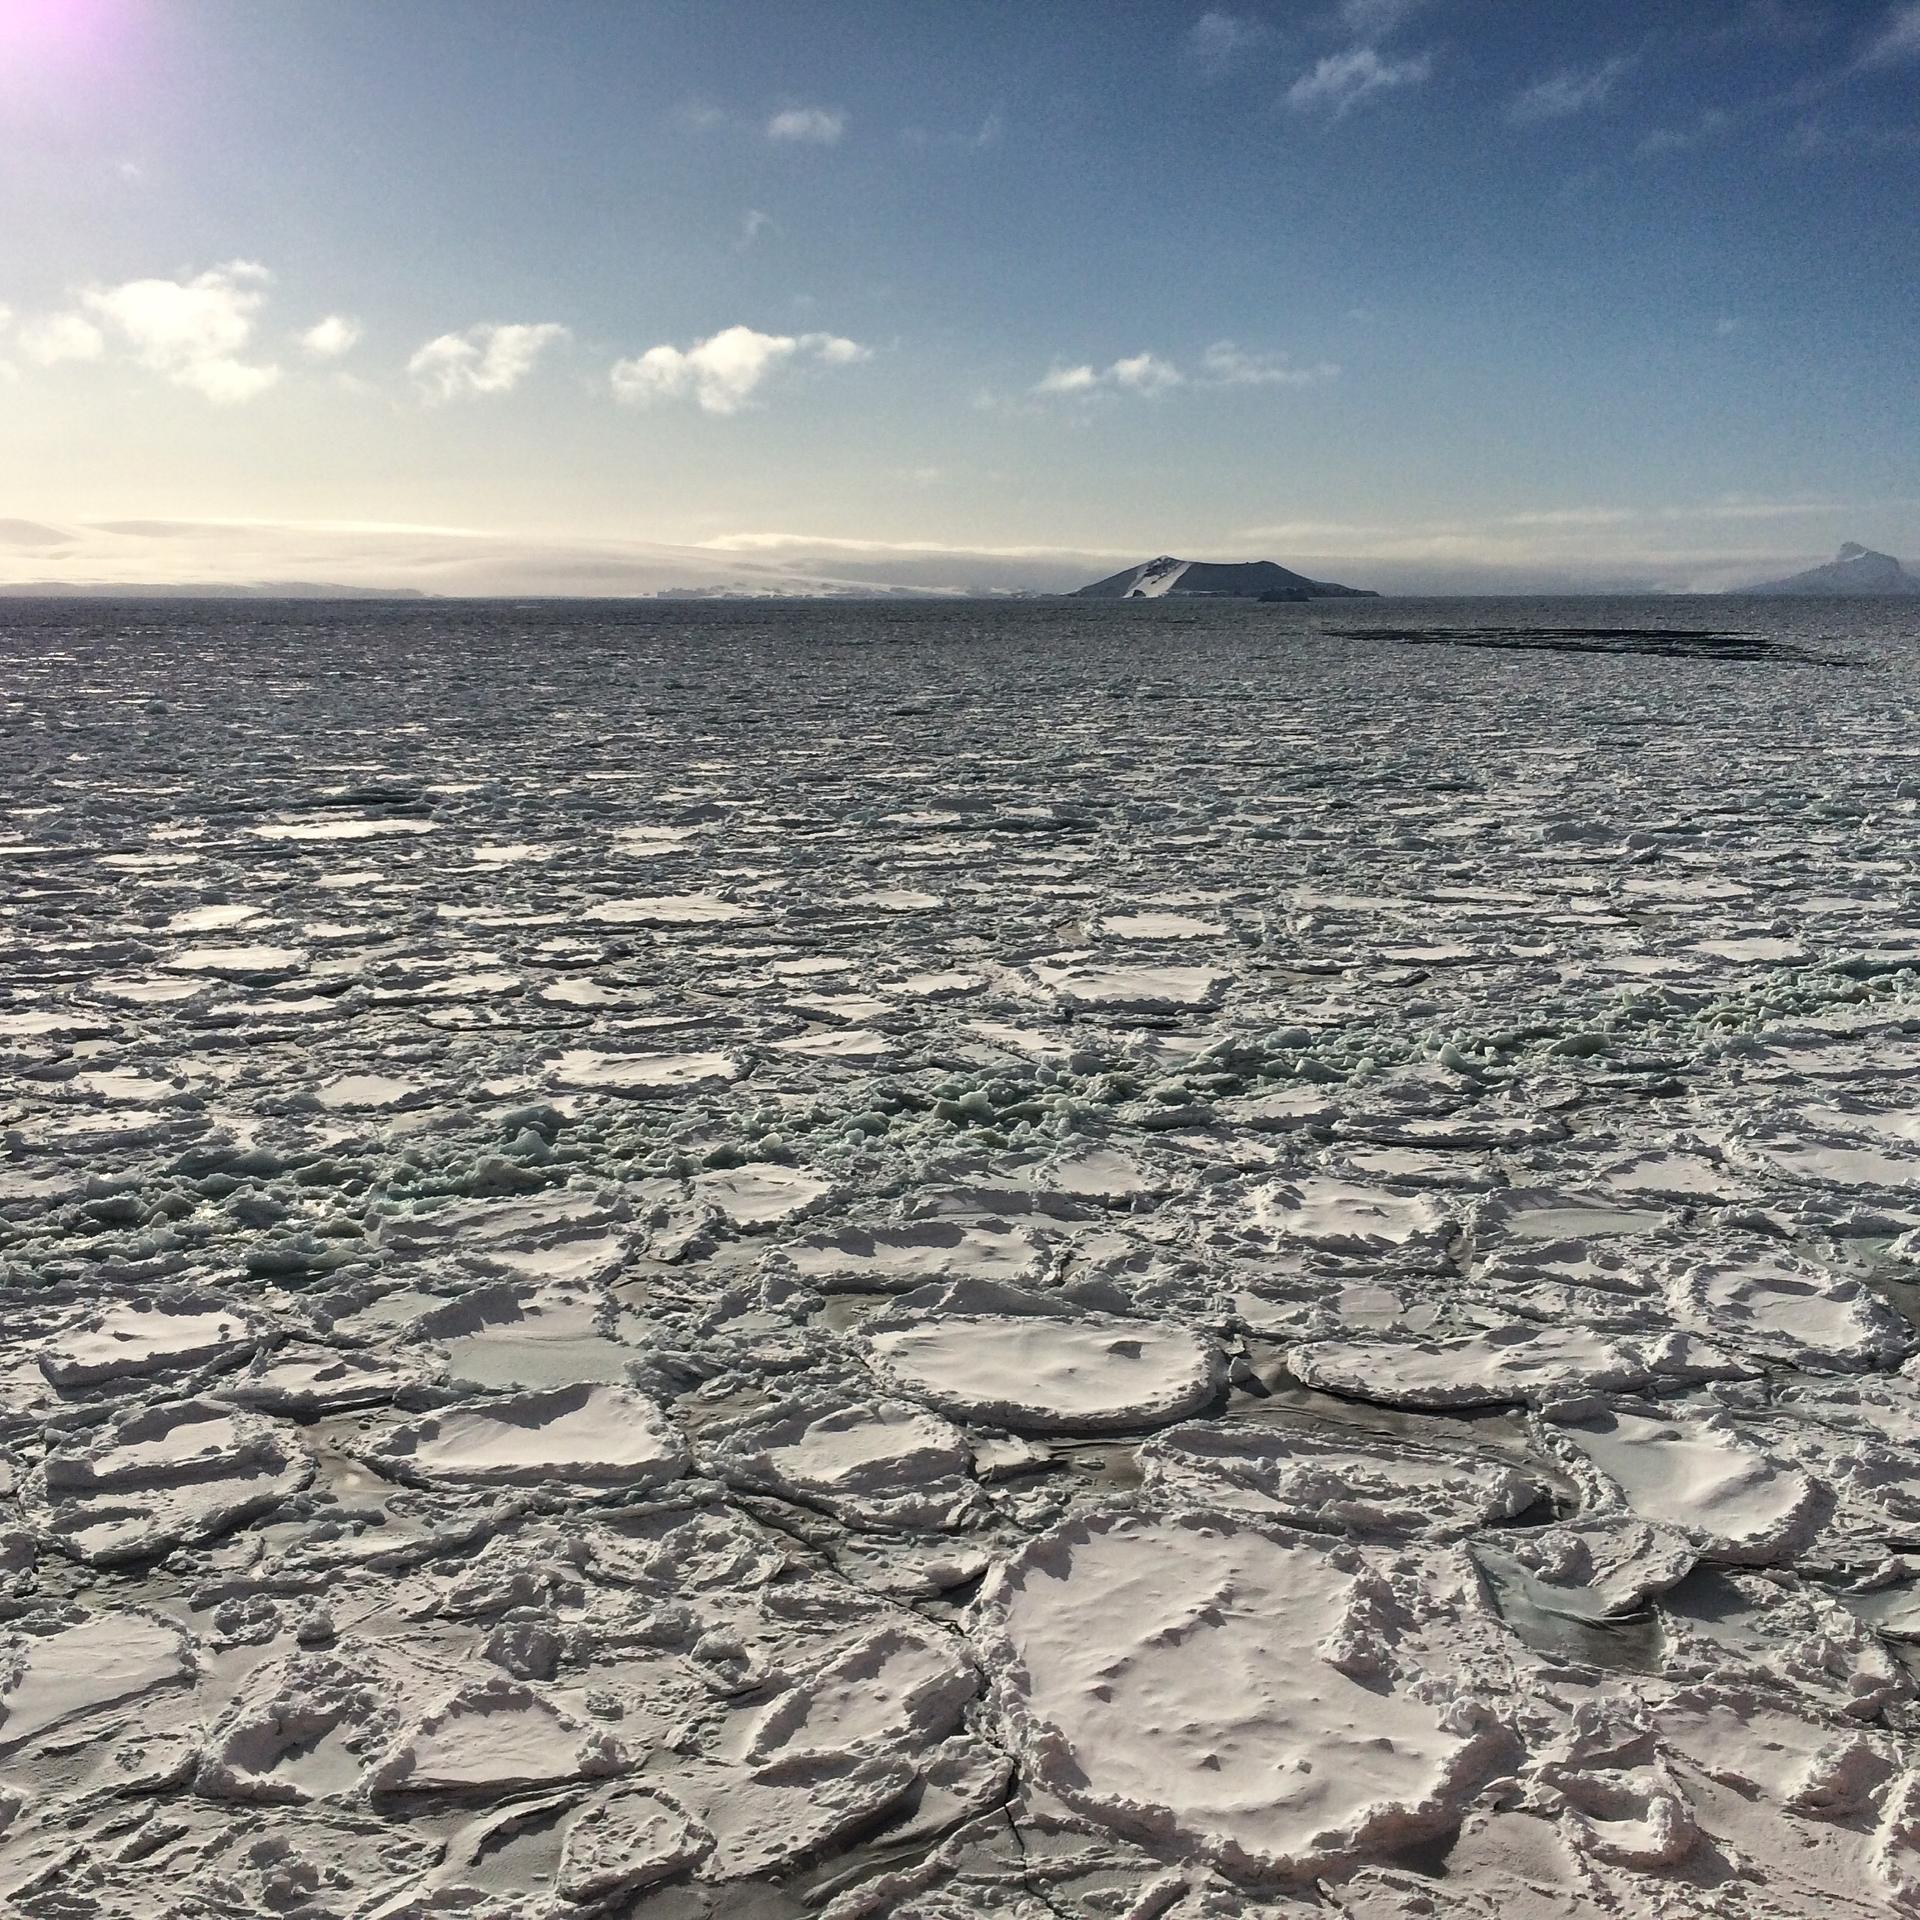 For miles, all you can see is an expanse of sea ice.